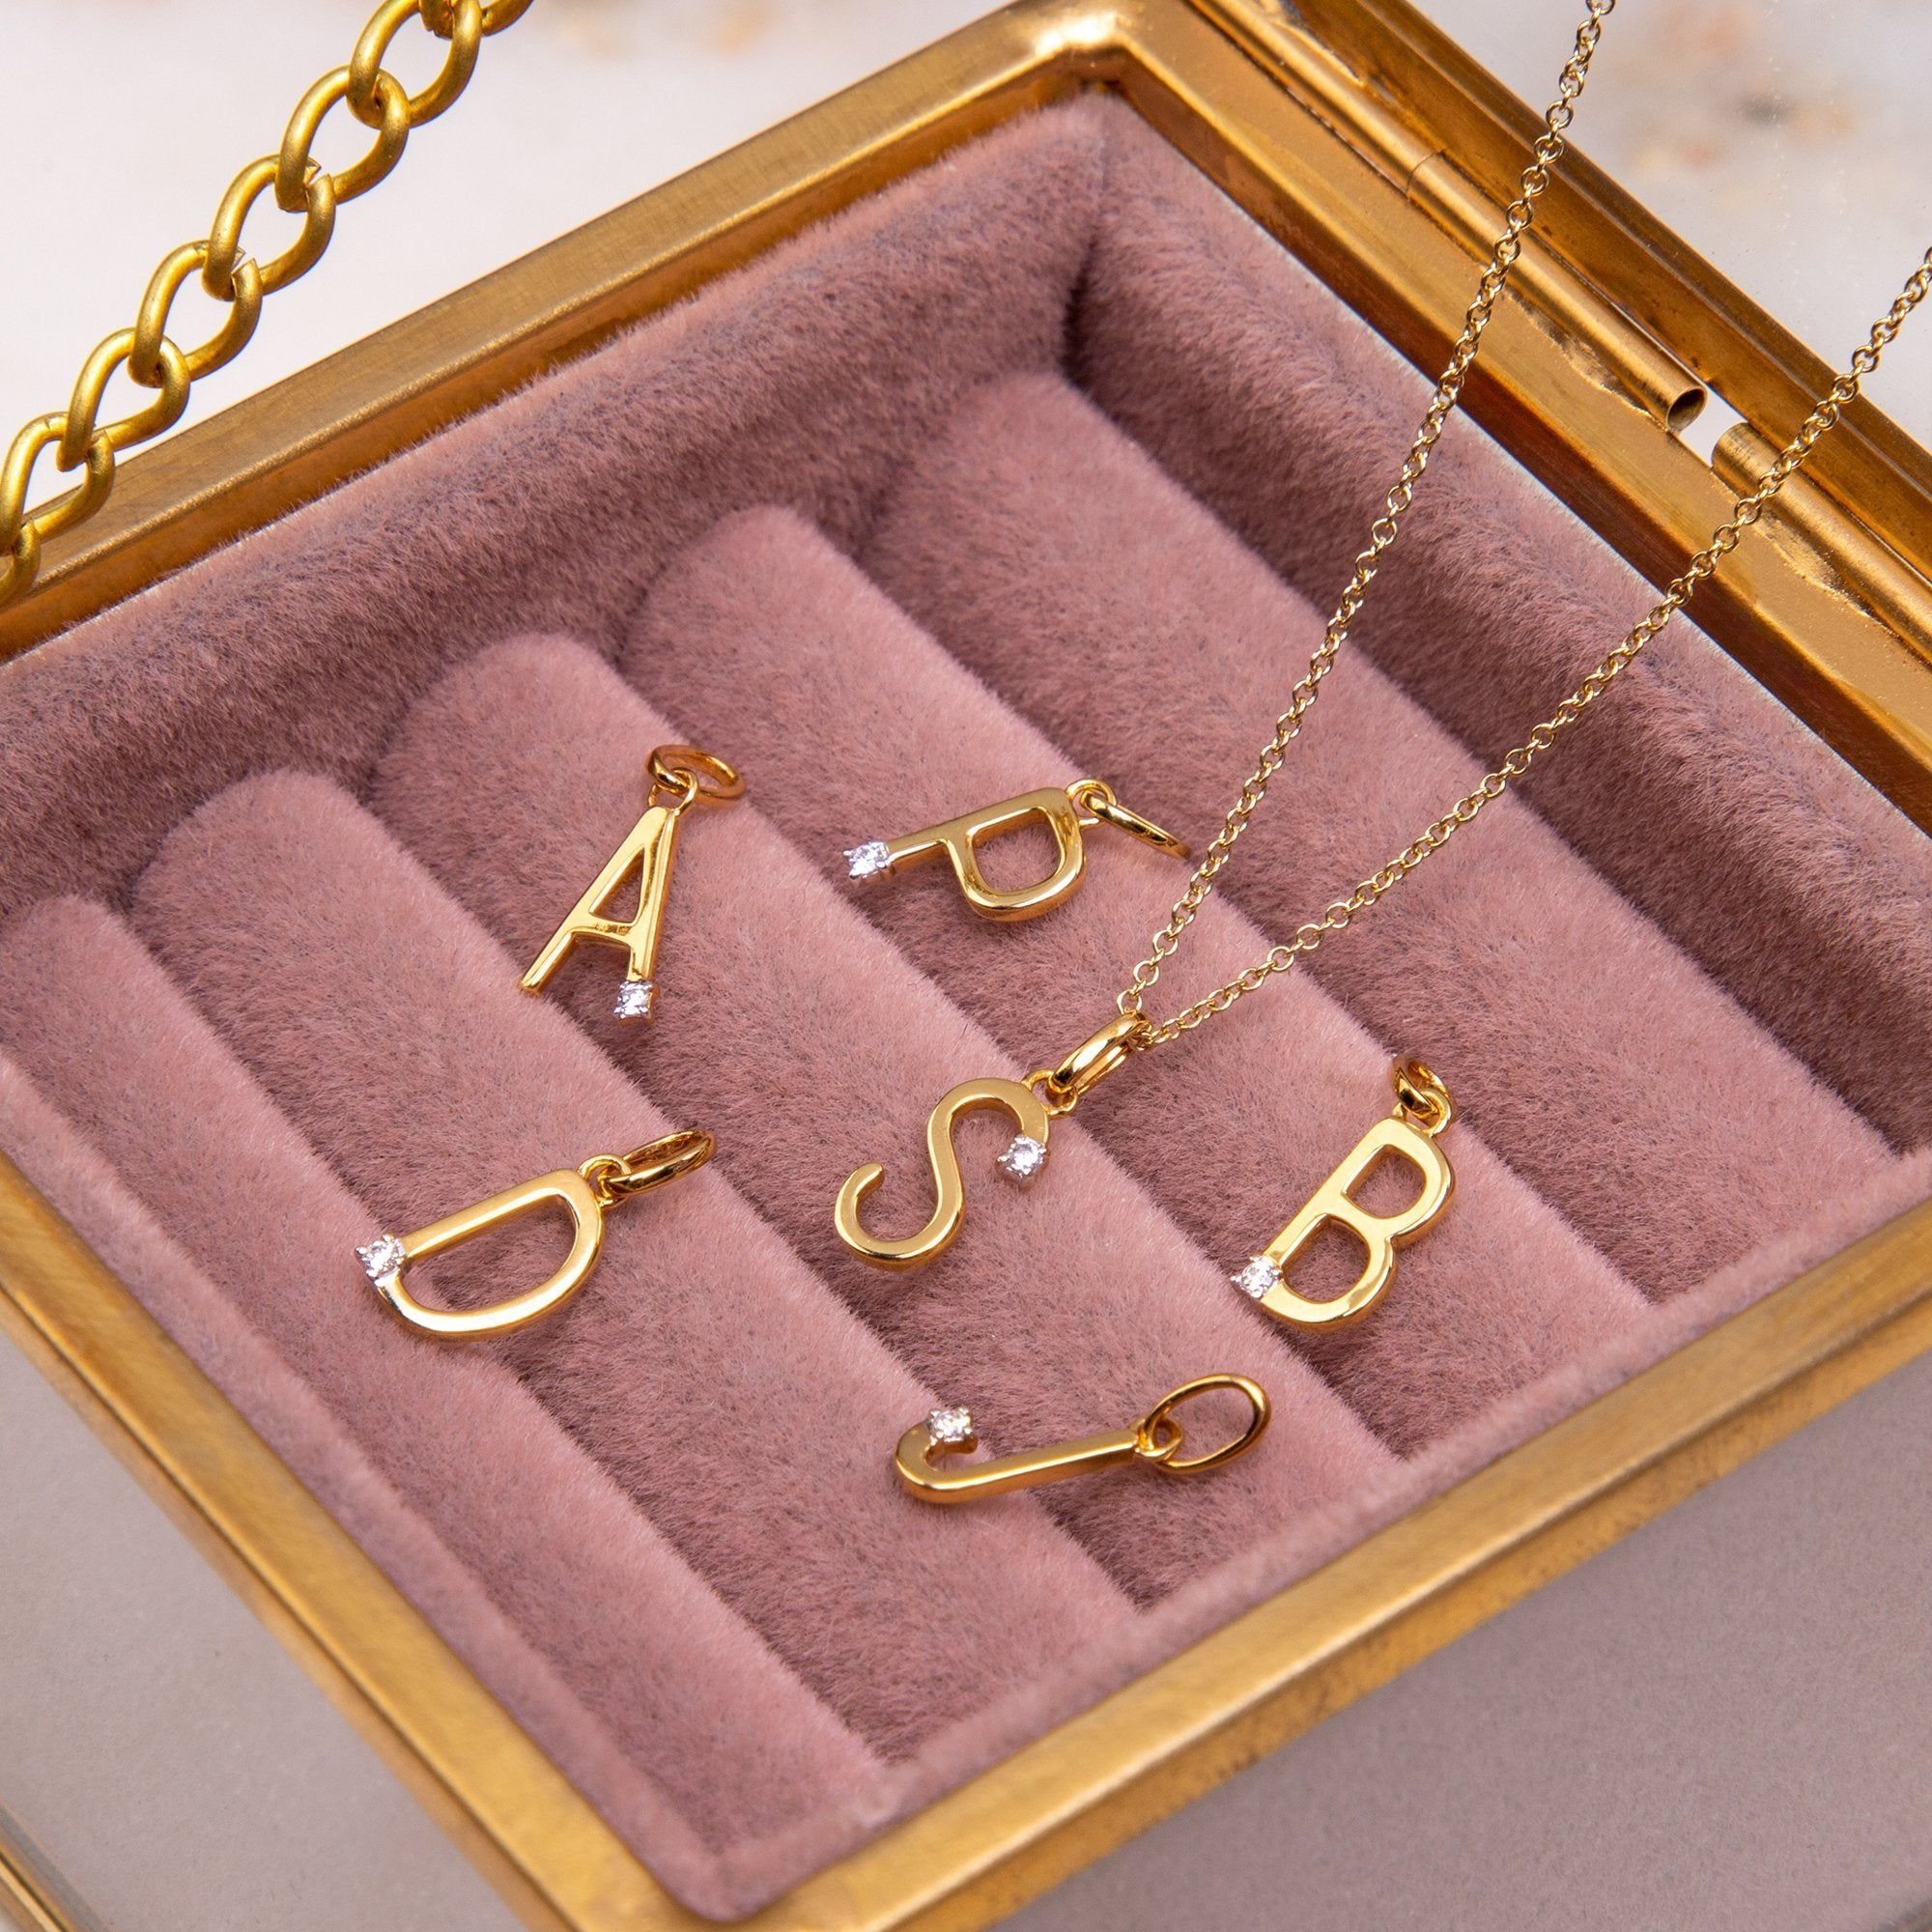 The Gemondo Initials Collection | Gemondo Gemstone Letter Necklaces and Charms